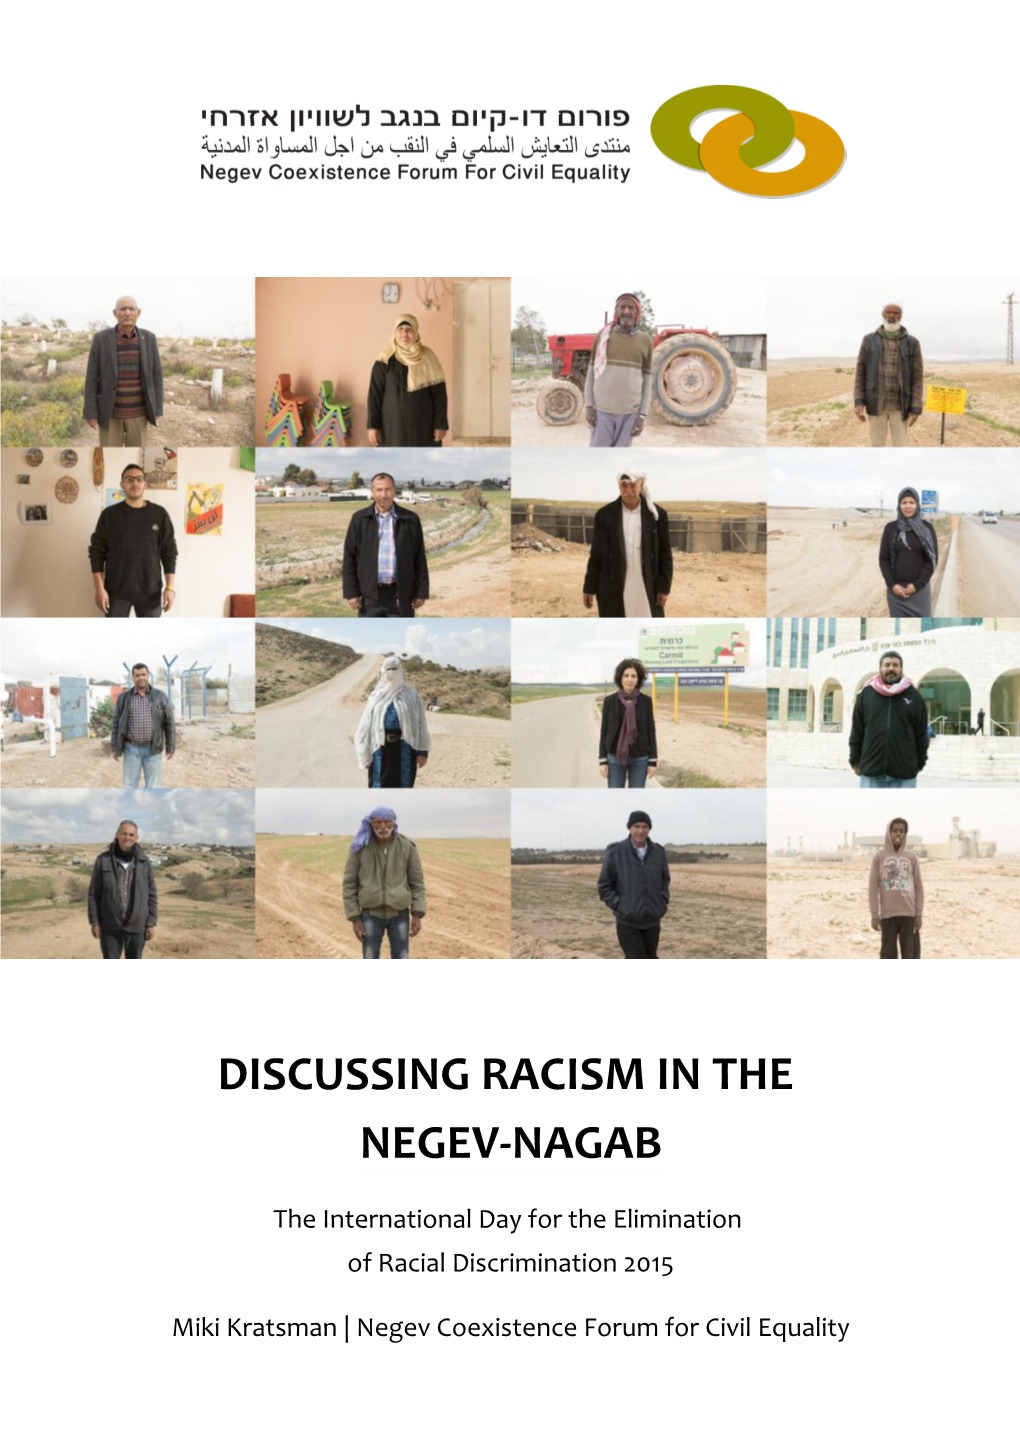 The in Racism Discussing Nagab